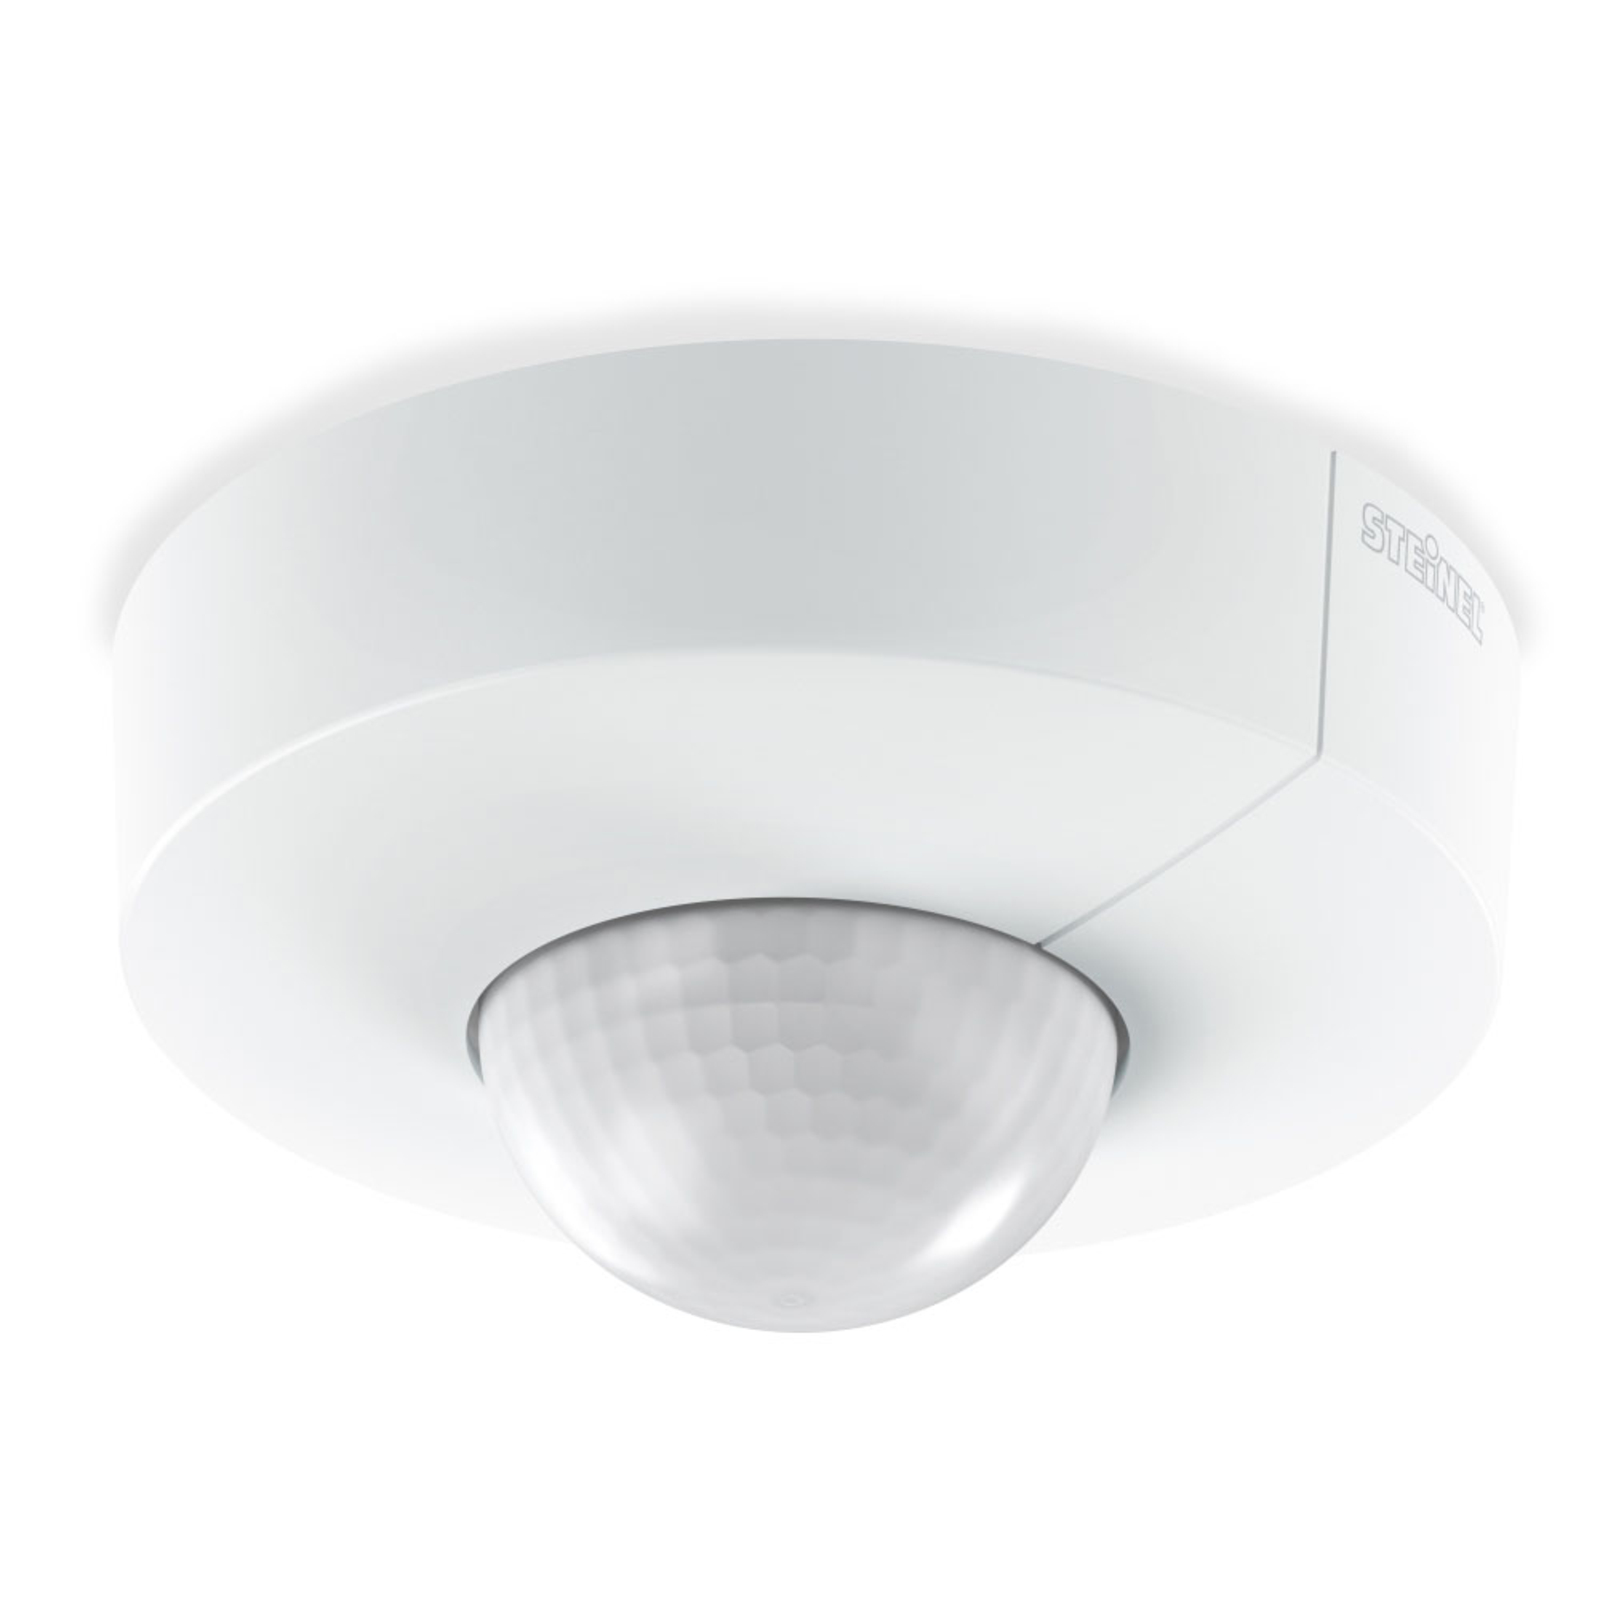 IS 3360 COM1 motion detector surface-mounted round